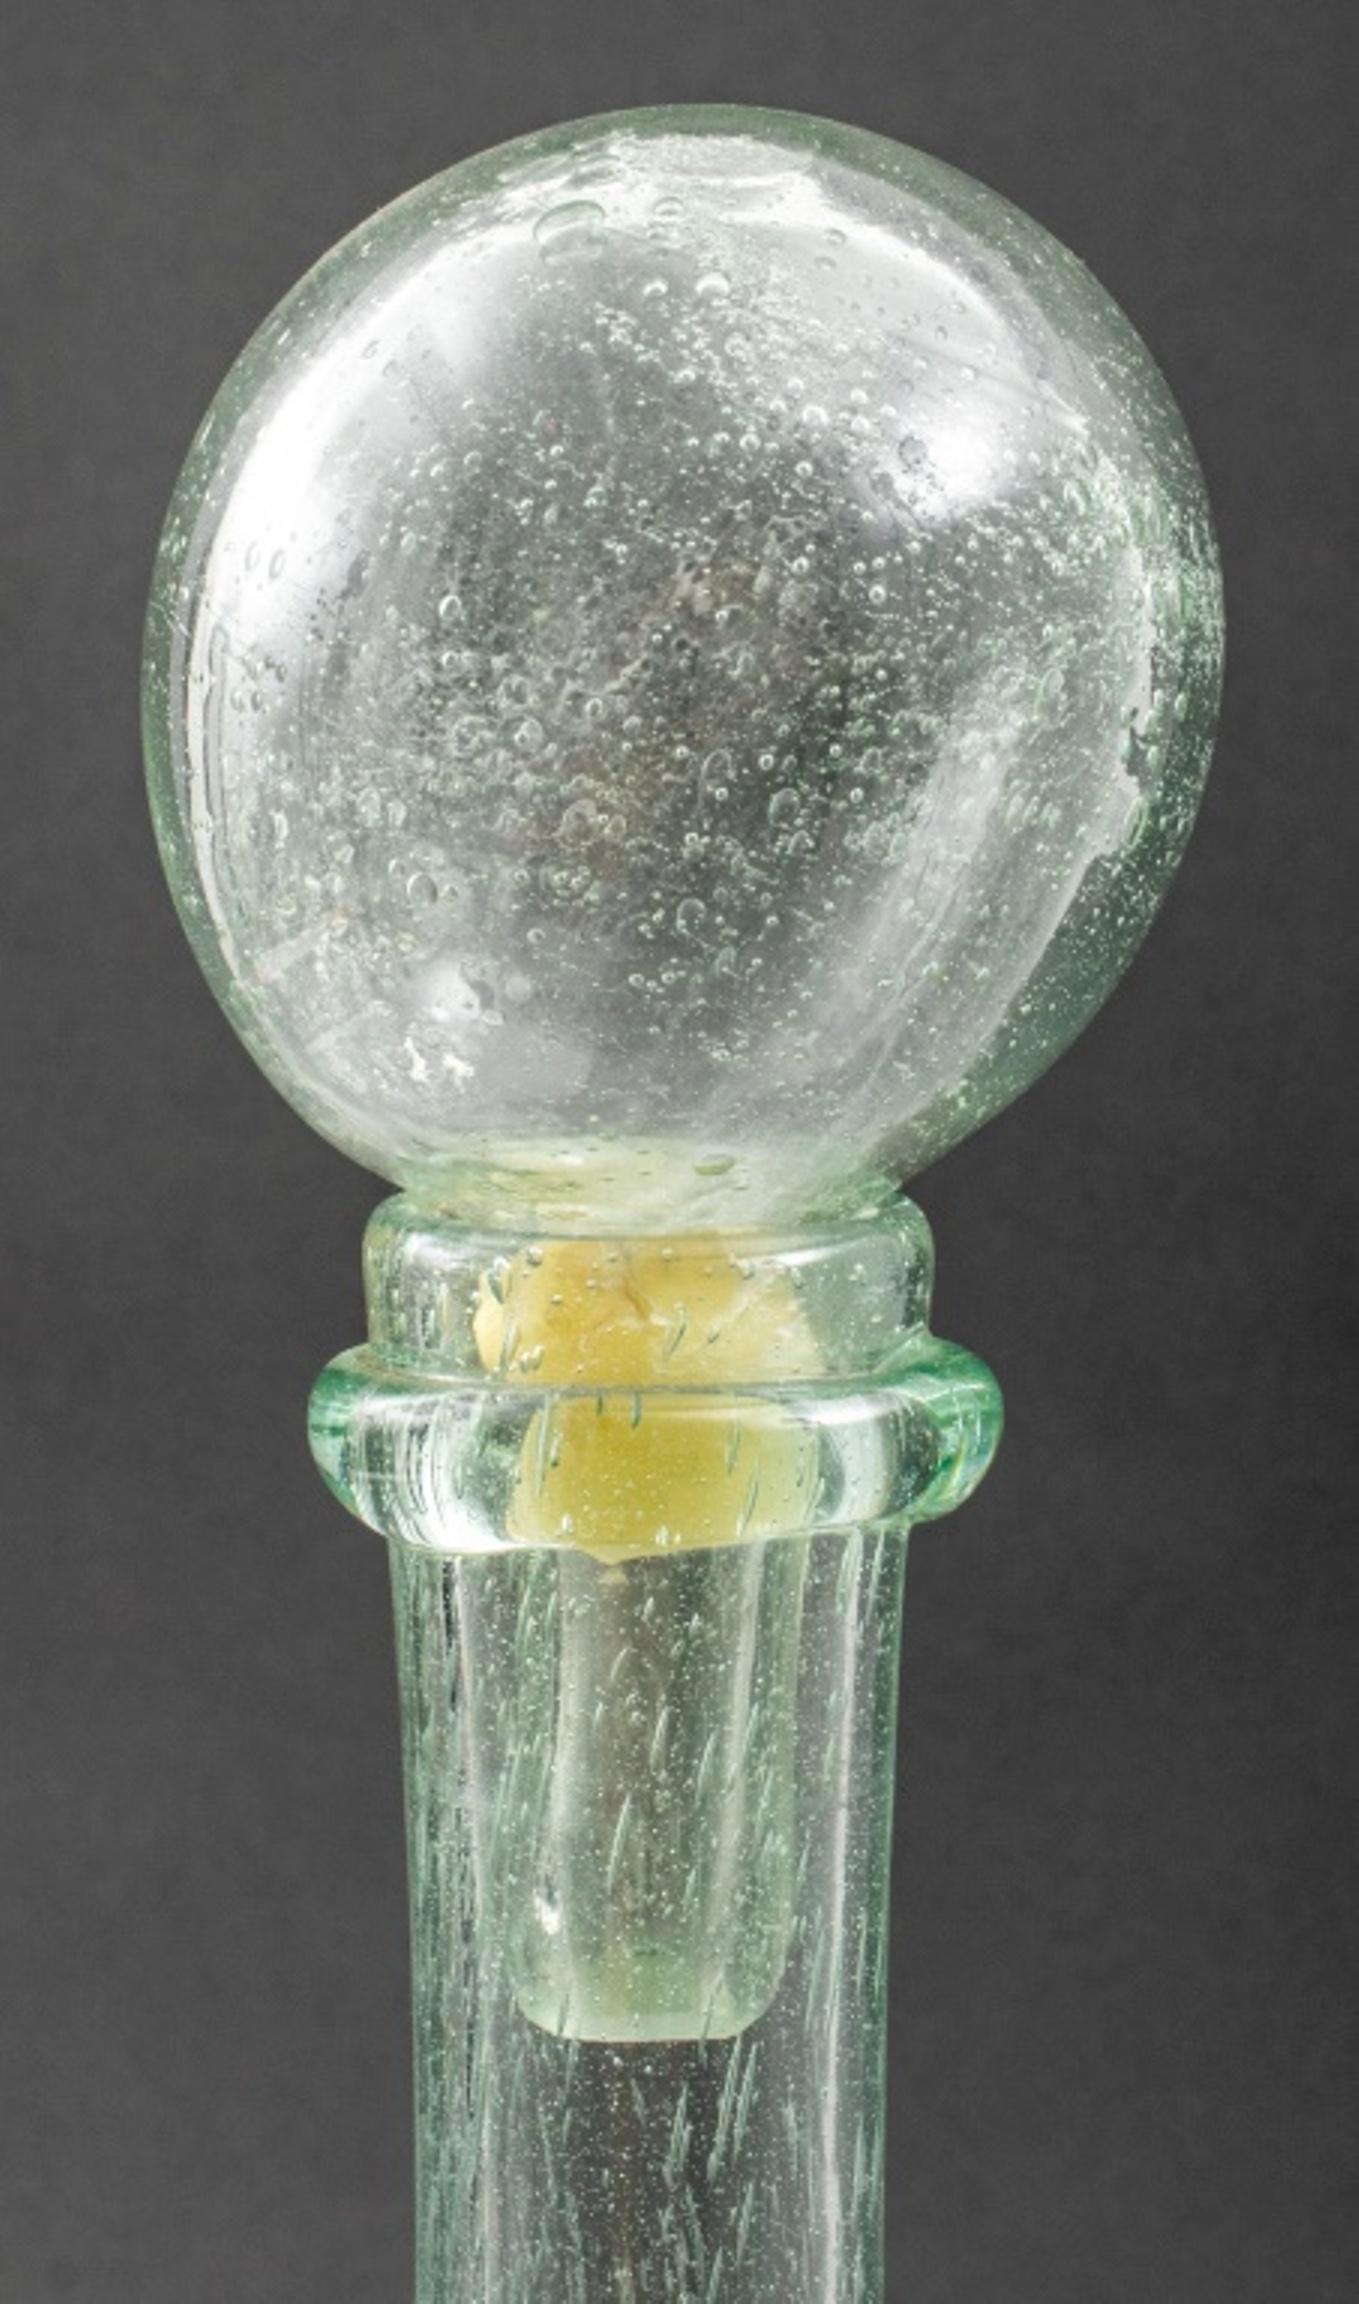 La Verrerie de Biot French bubble glass decanter bottle with large ball stopper, marked 'Biot' on the neck. 
Measures: 20.5